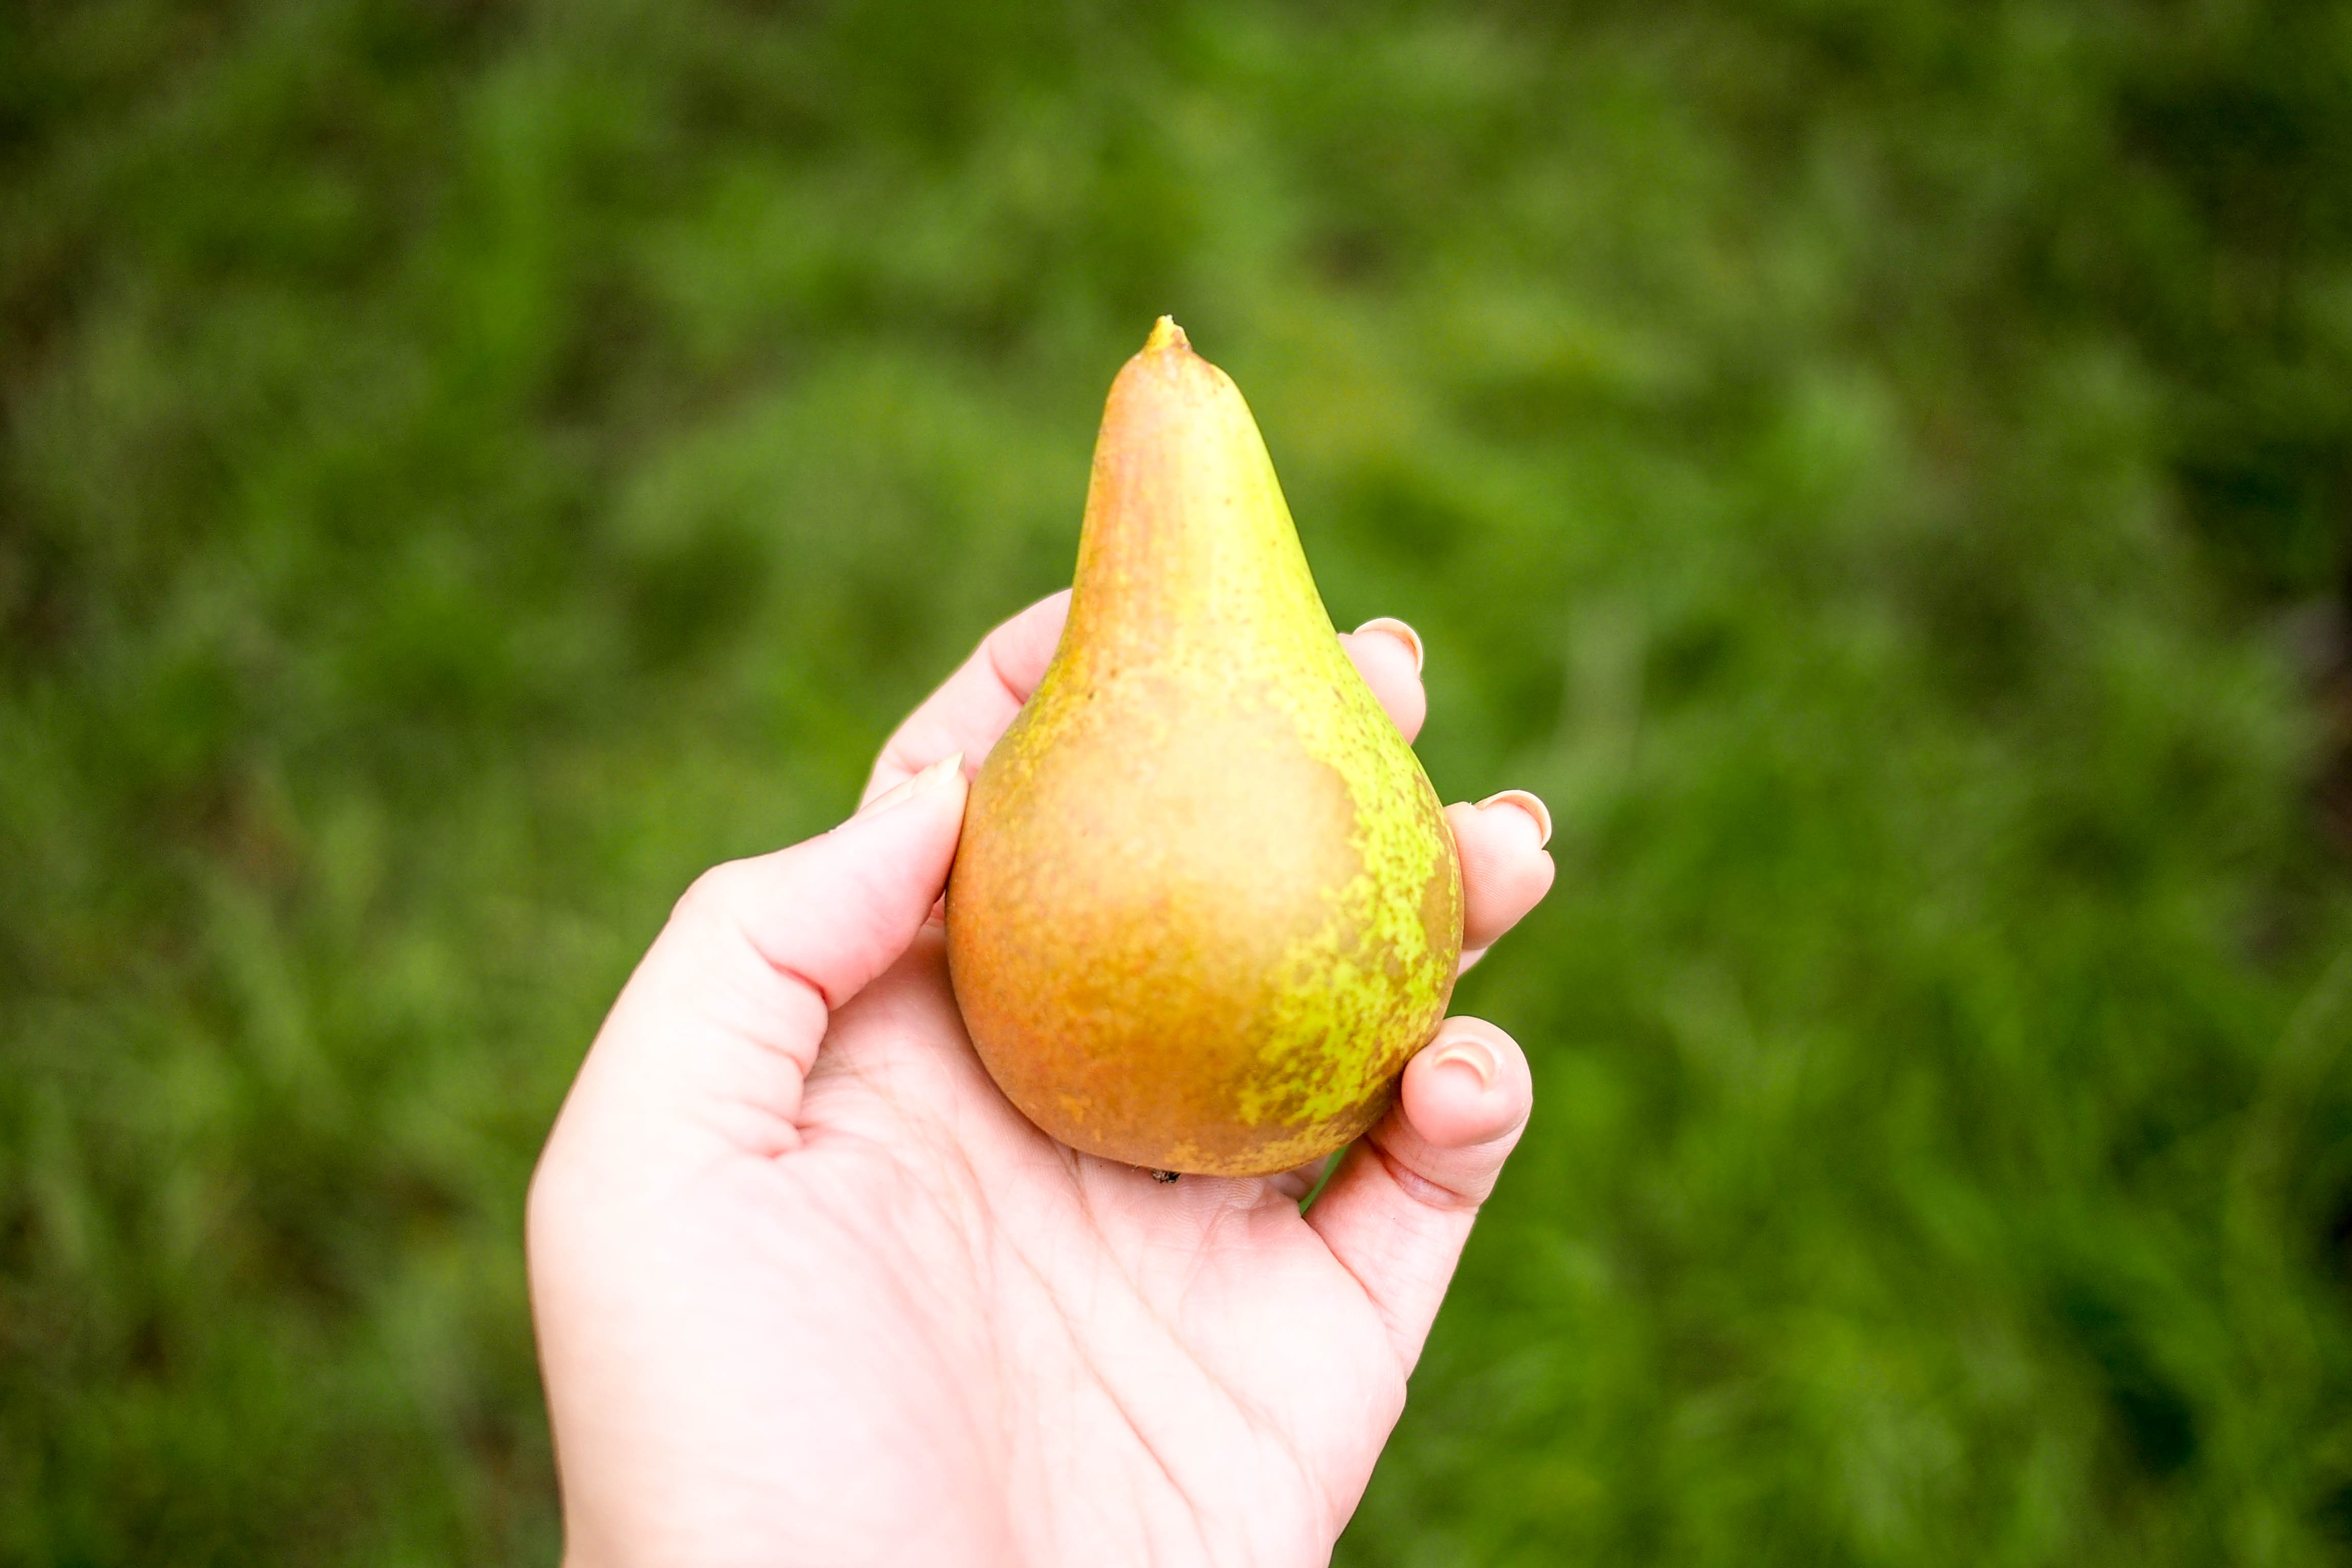 Freshly plucked pear from the tree